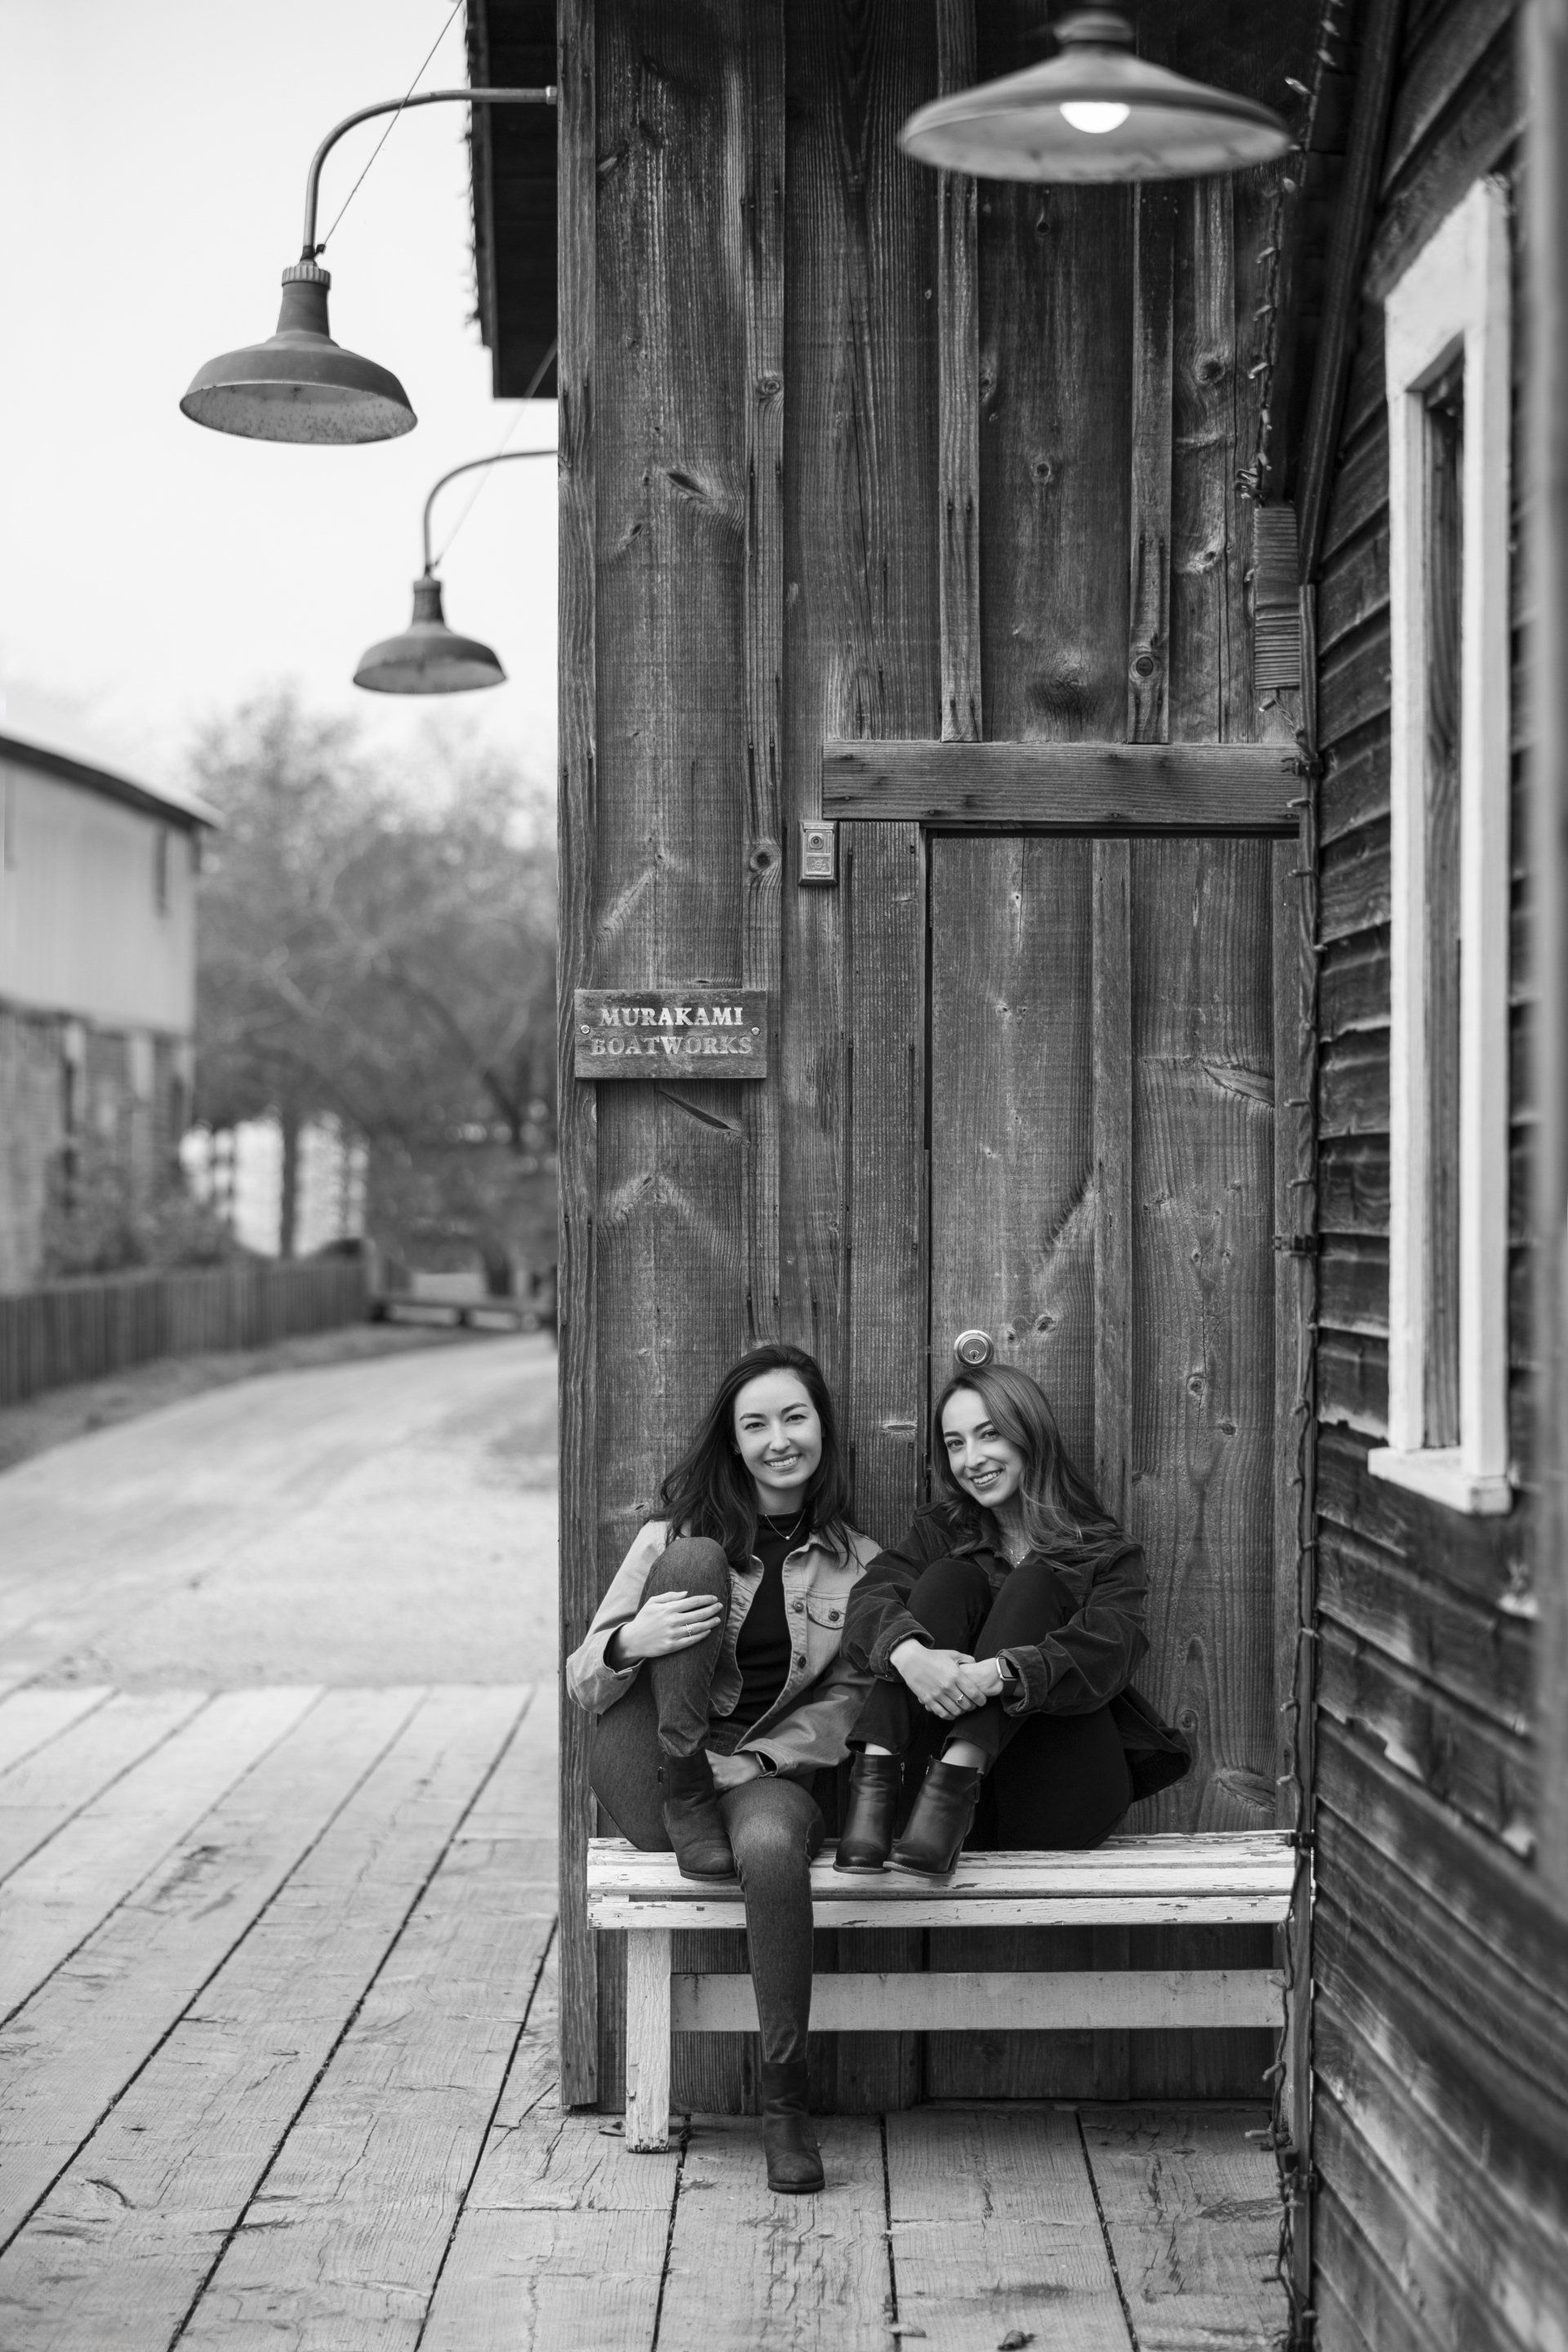 Natalie-DAngelo-Photography-Vancouver-BC-Canada-BlackWhite-Family-Portraits-Visual-Storyteller-smiling-sisters-young-adults-portrait